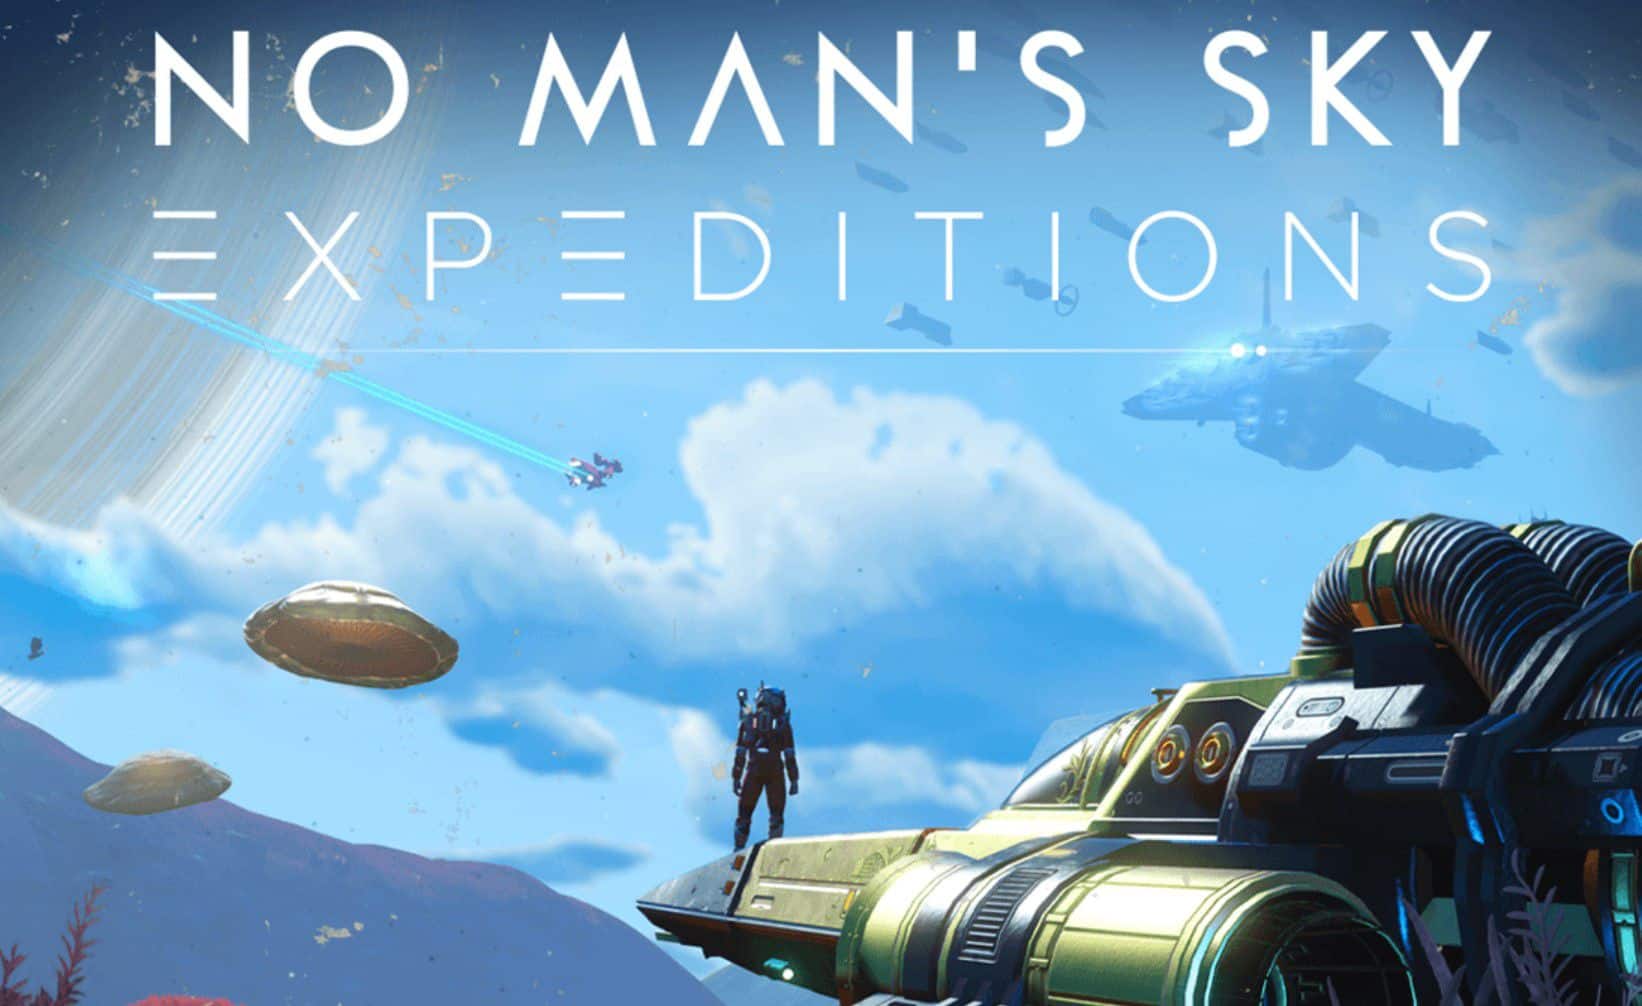 No Man's Sky Expeditions update 3.3